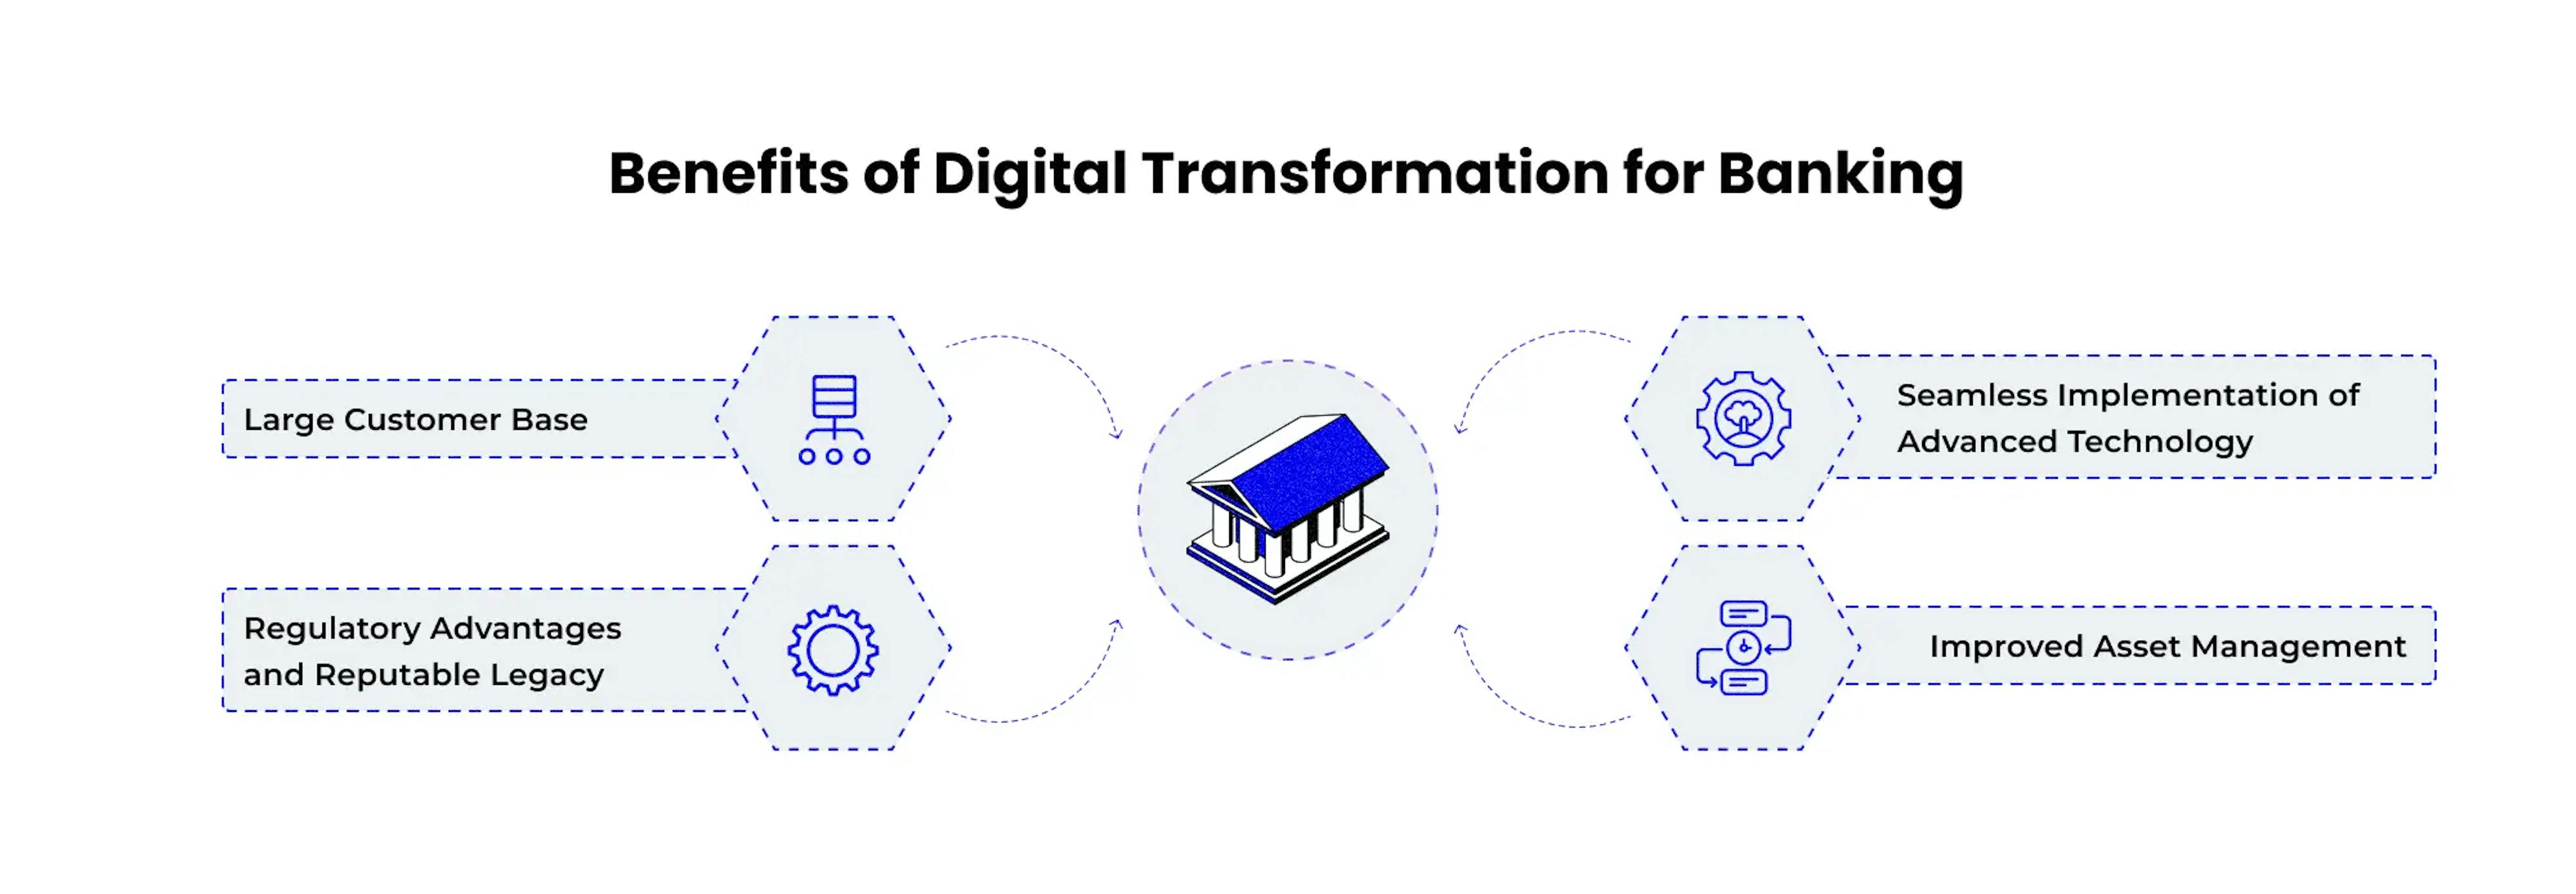 Benefits of Digital Transformation for Banking